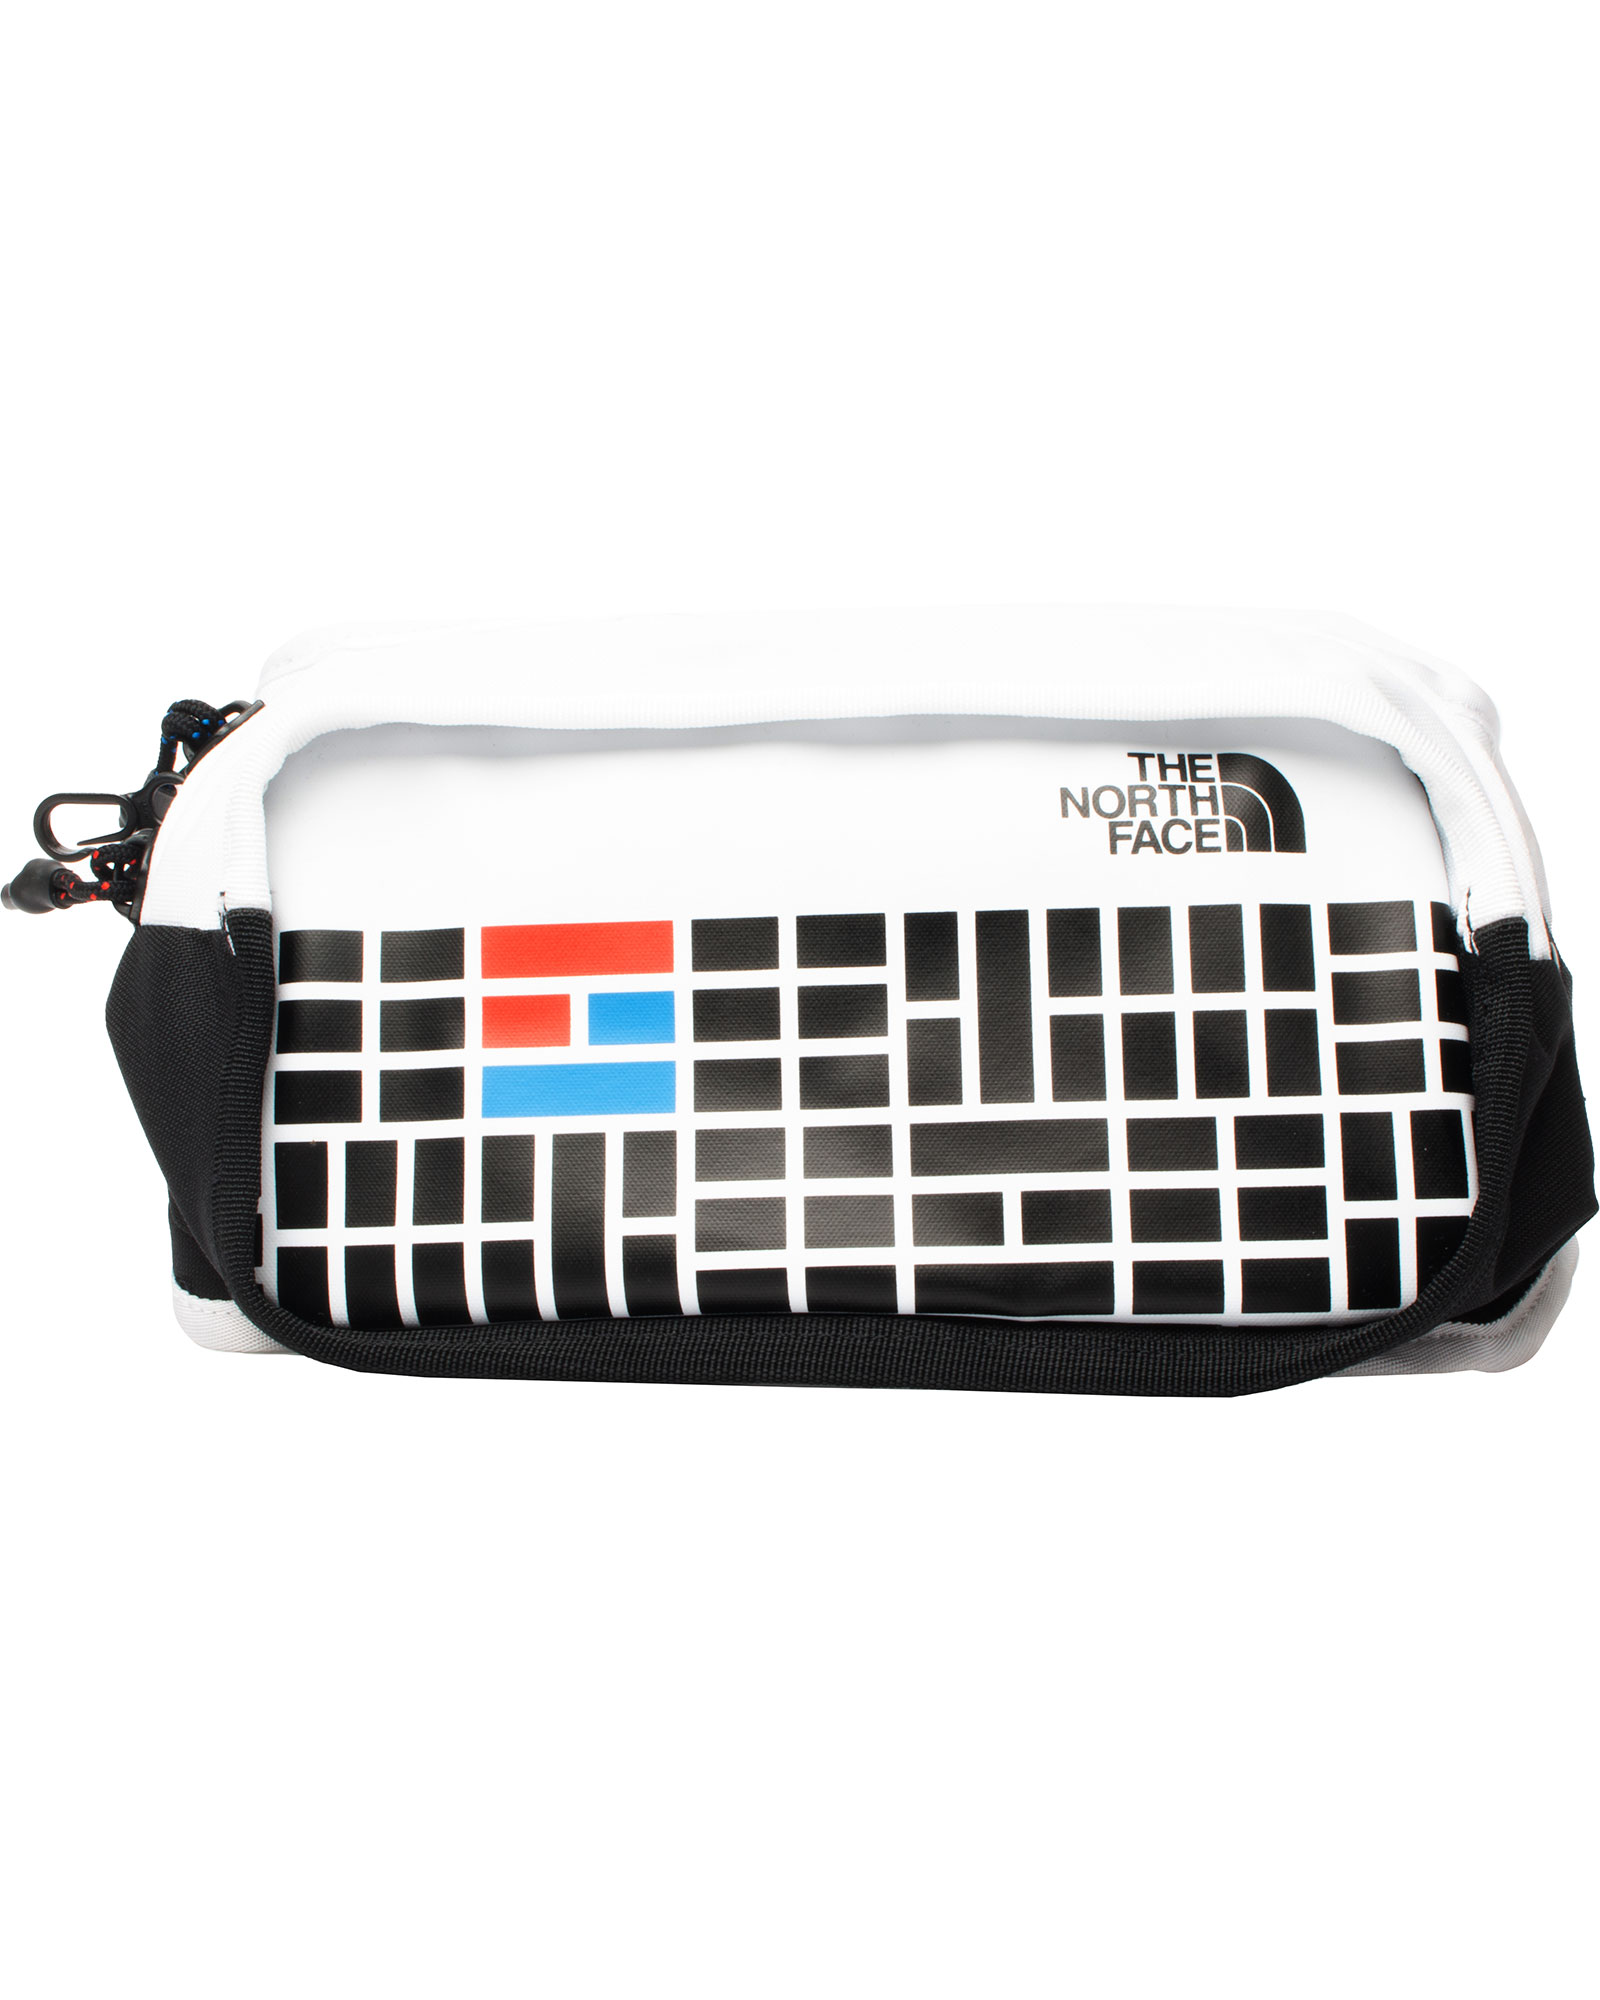 The North Face IC Hip Pack - TNF Black/TNF White